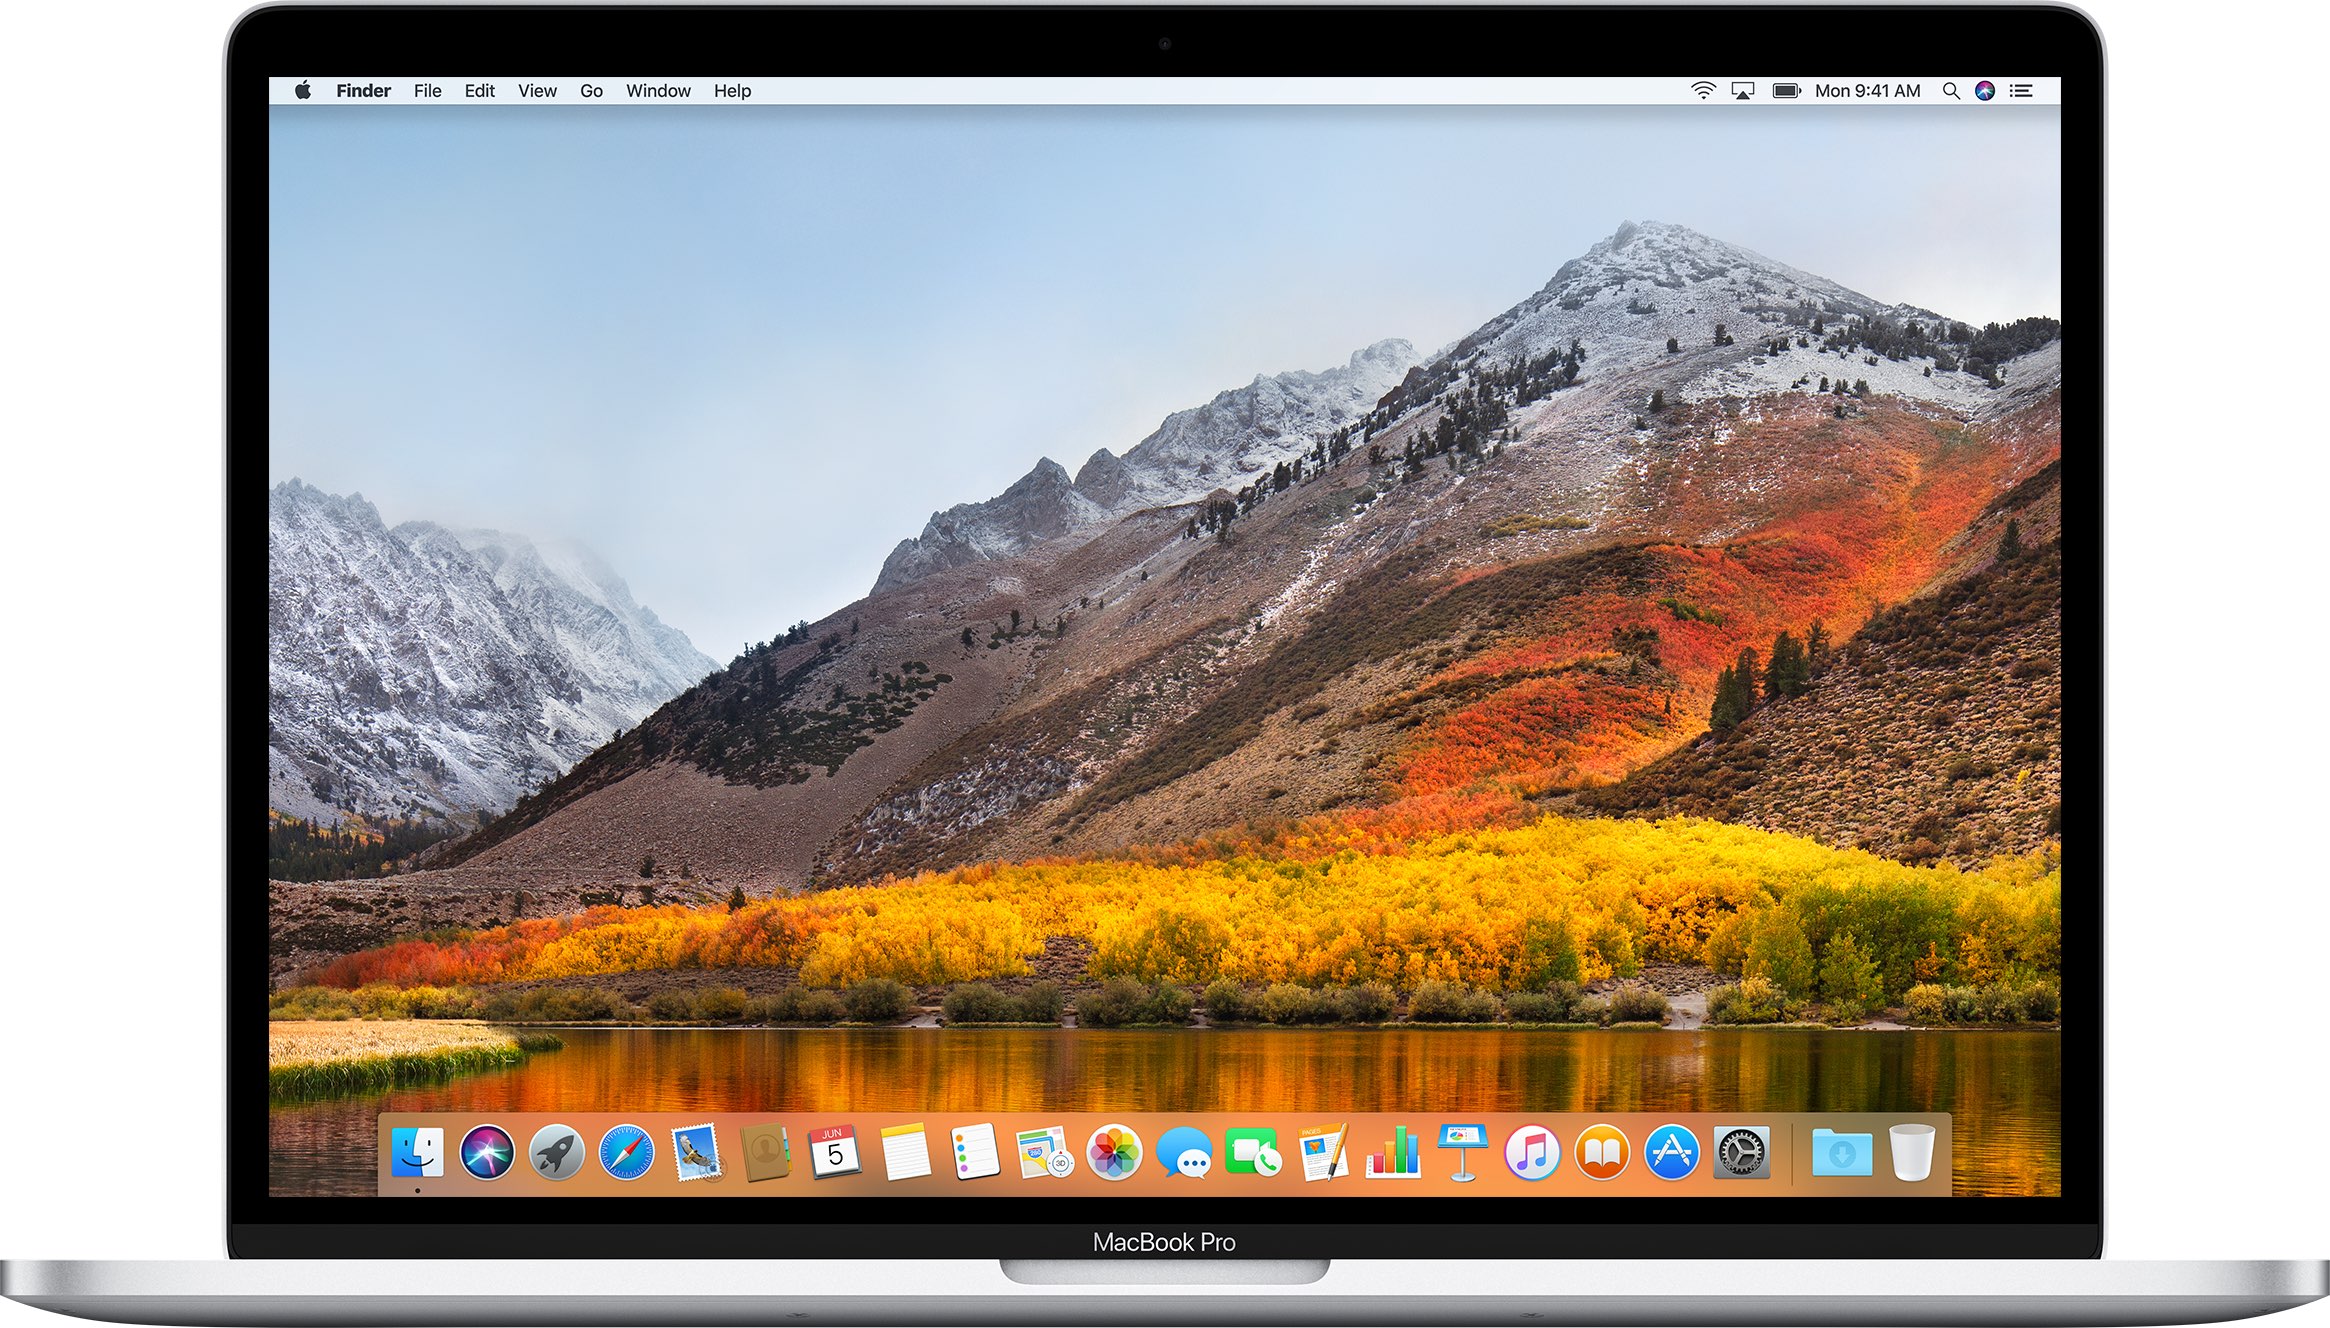 Night Shift for Mac requires macOS Sierra 10.12.4 and a 2012 Mac computer or newer.